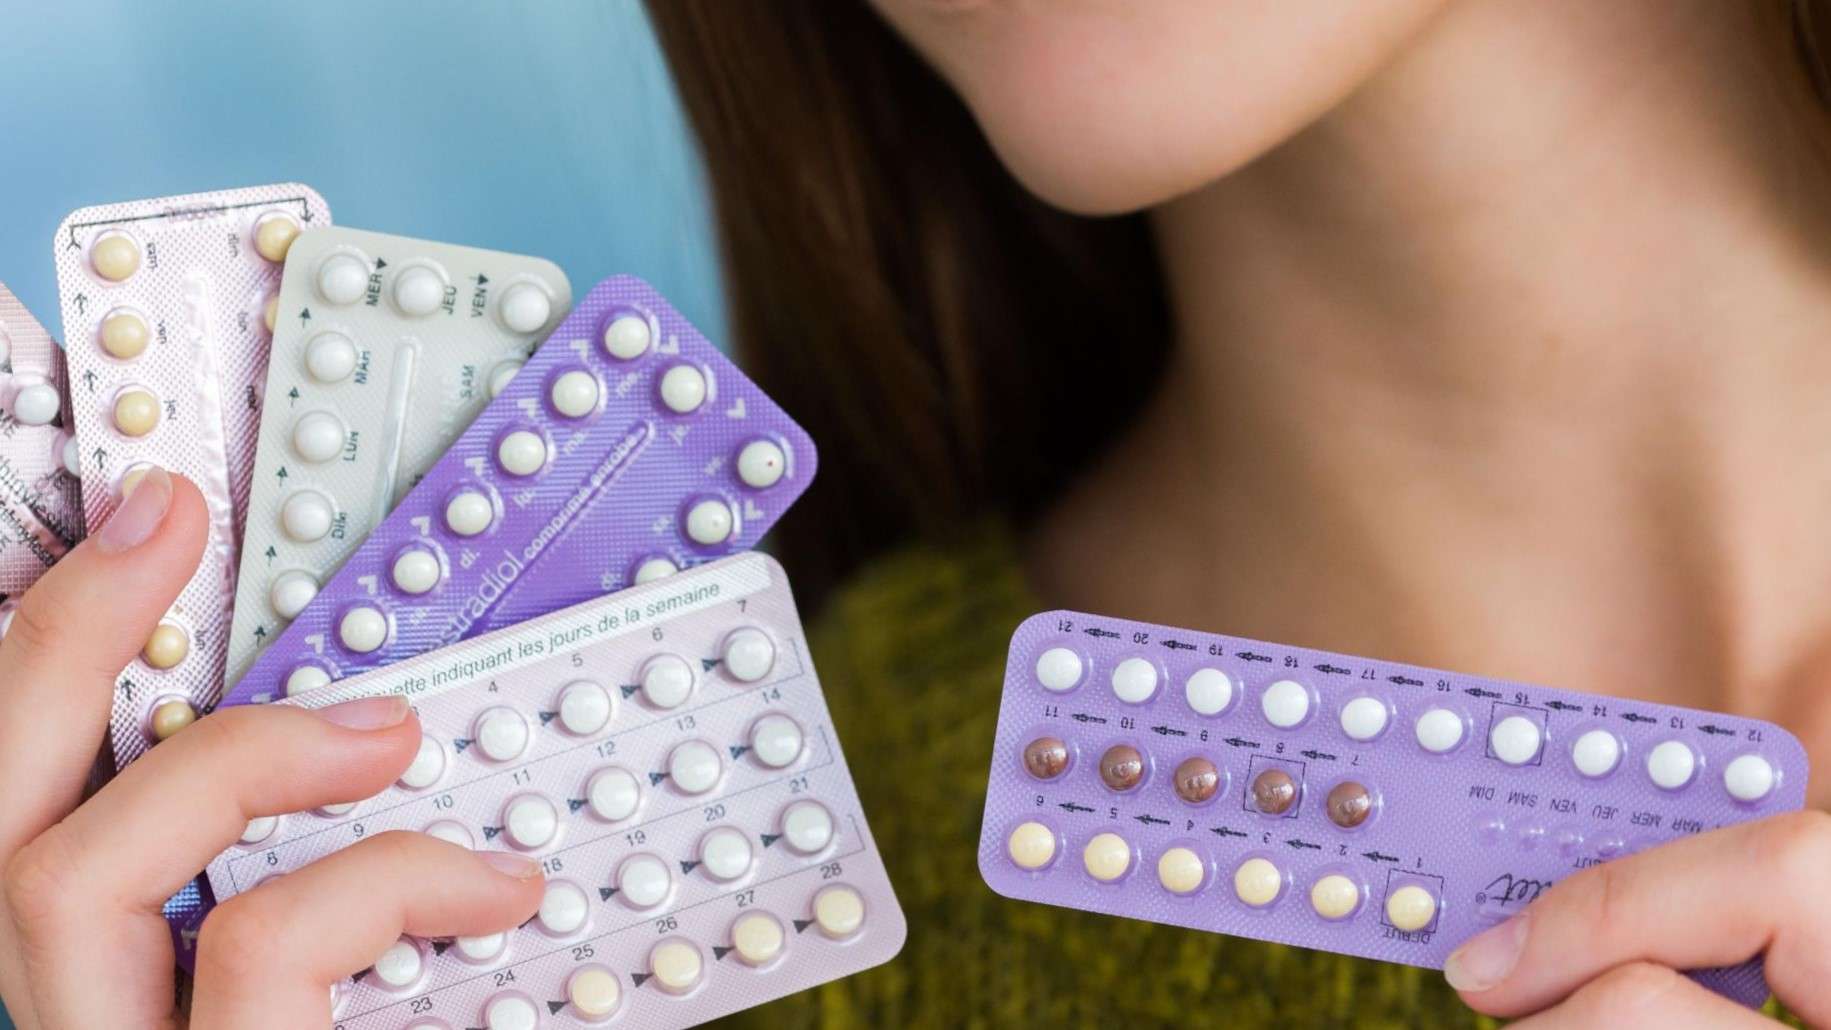 Hormonal birth control for ovarian cyst treatment without surgery